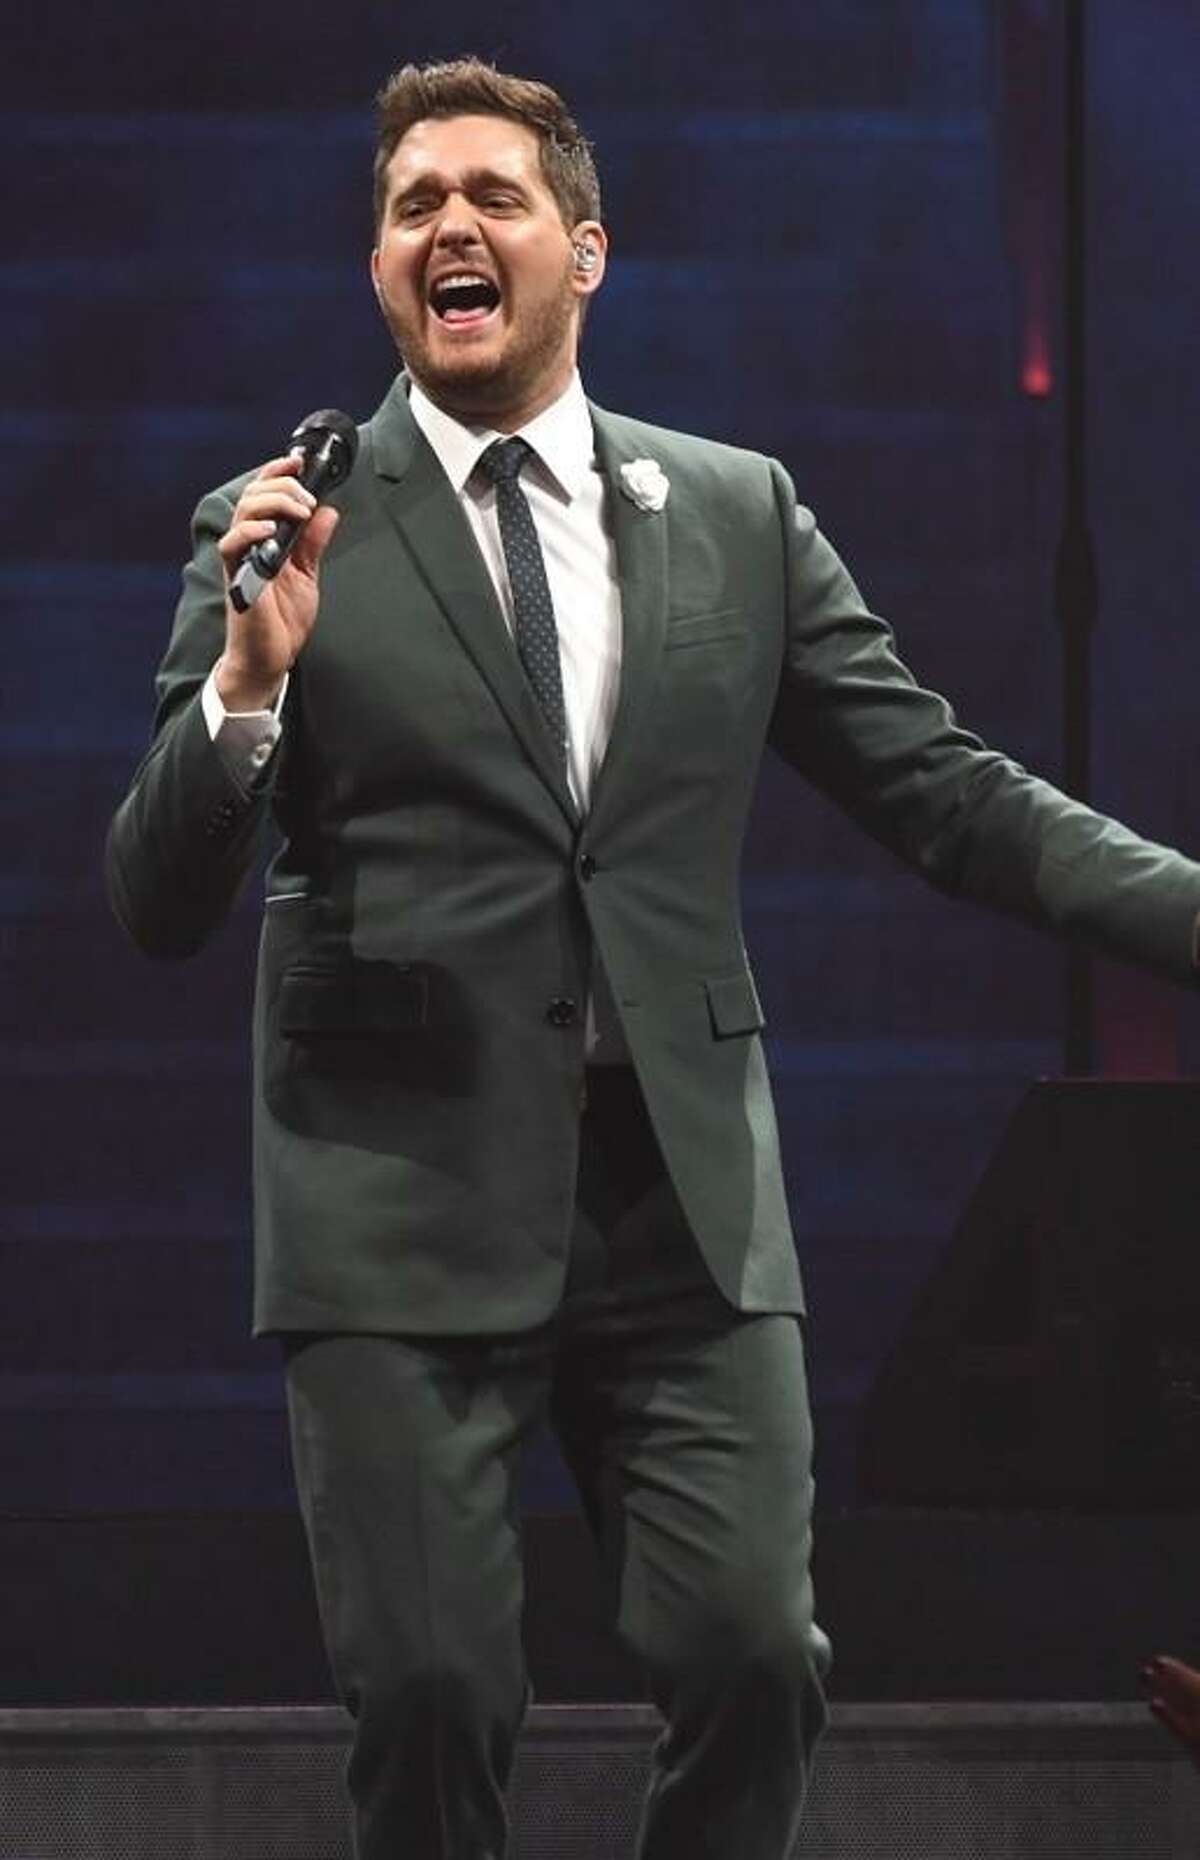 Canadian singer, songwriter, actor and record producer, Michael Buble is shown performing on stage to a sold out crowd at the DCU Center in Worcester, Massachusetts Feb. 26. Michael, backed by 40 musicians entertained the capacity crowd with his music and conversation. To learn more about Michael Buble’s current concert tour you can visit www.michaelbuble.com